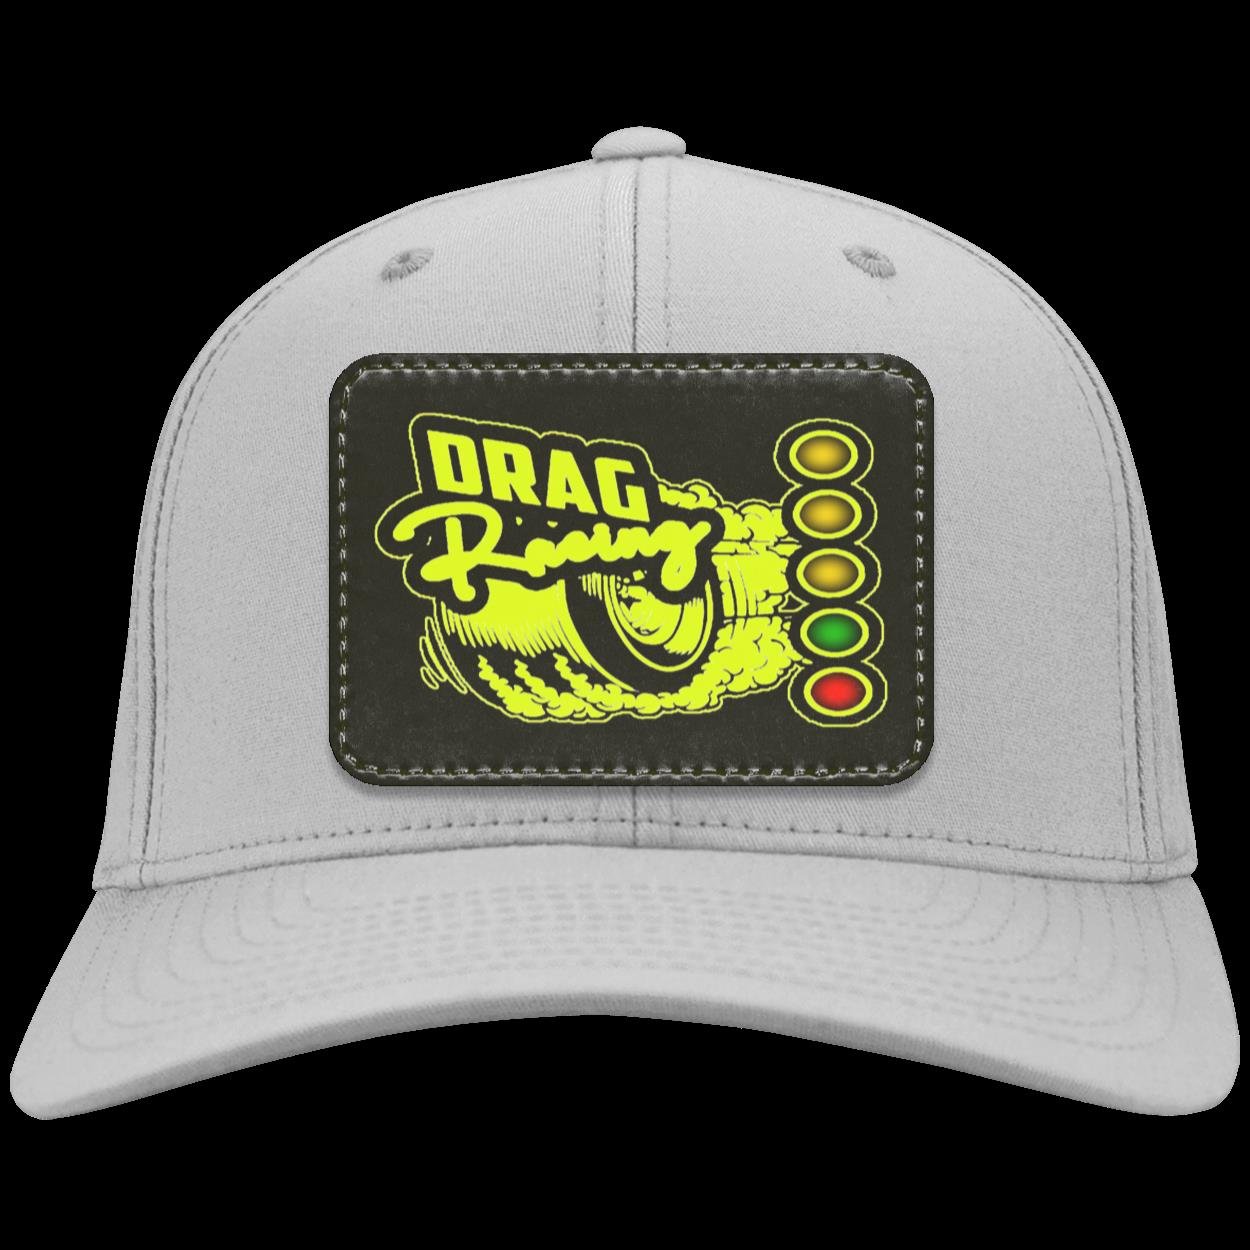 Drag Racing Patched Twill Cap V9